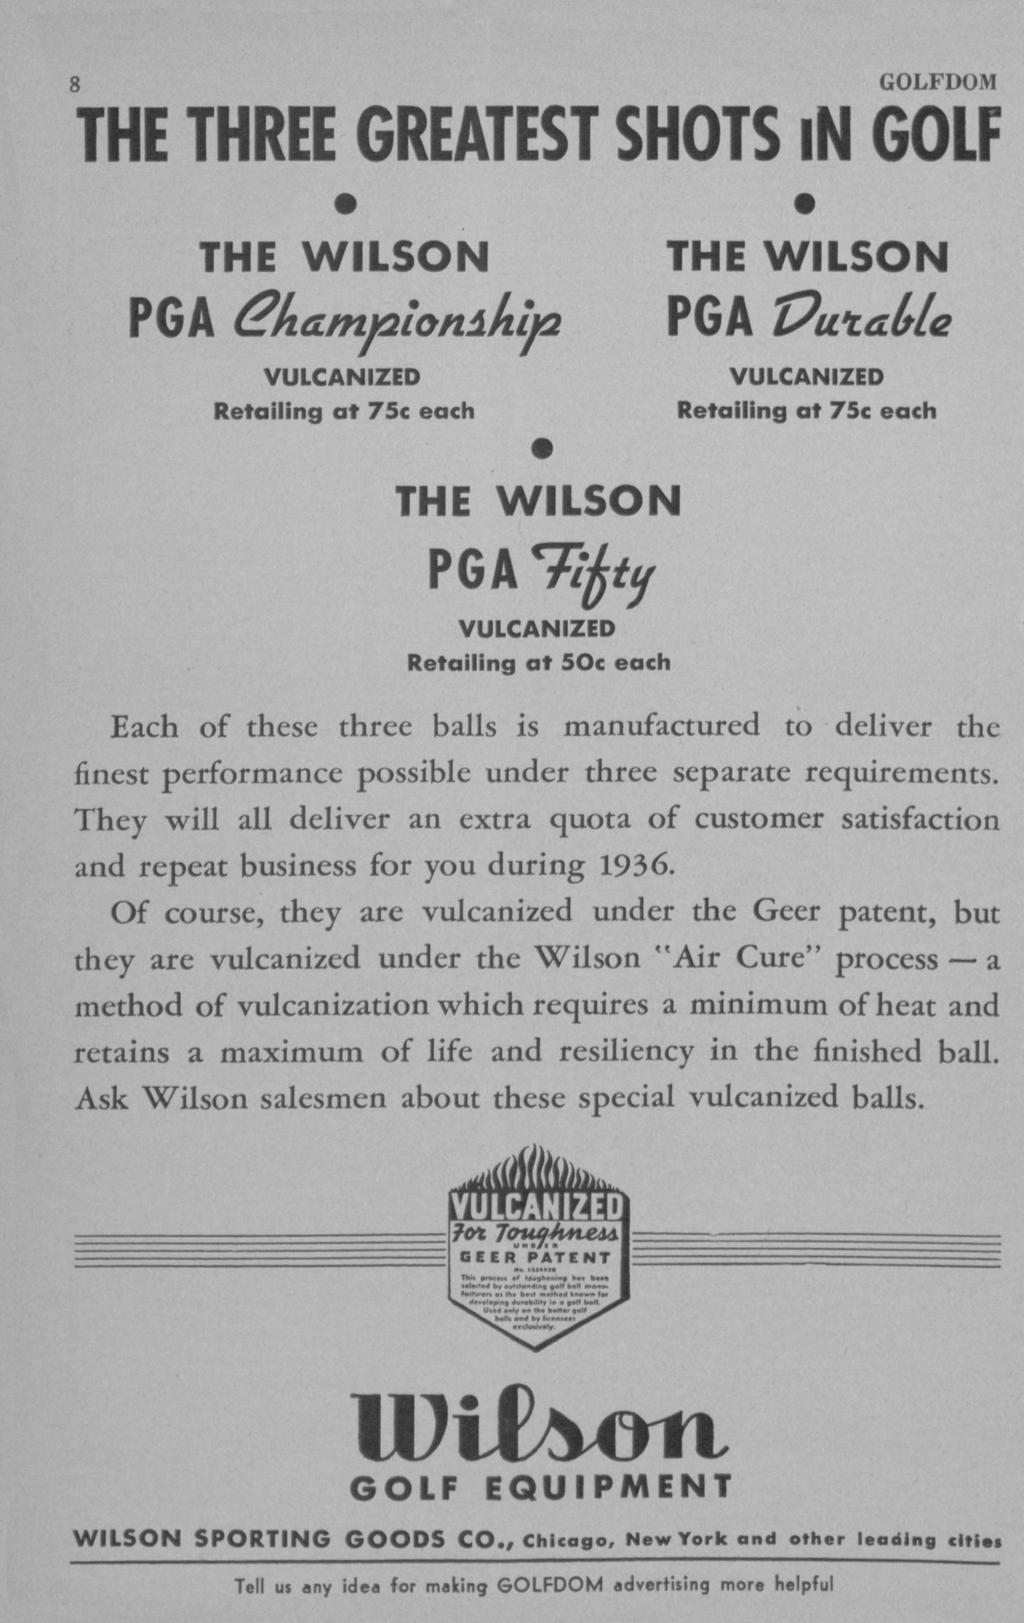 THE THREE GREATEST SHOTS in GOLF THE WILSON PGA ampionikly2 VULCANIZED Retailing at 75c each THE WILSON PGA VutMe VULCANIZED Retailing at 75c each THE WILSON PGA7^y VULCANIZED Retailing at 50c each